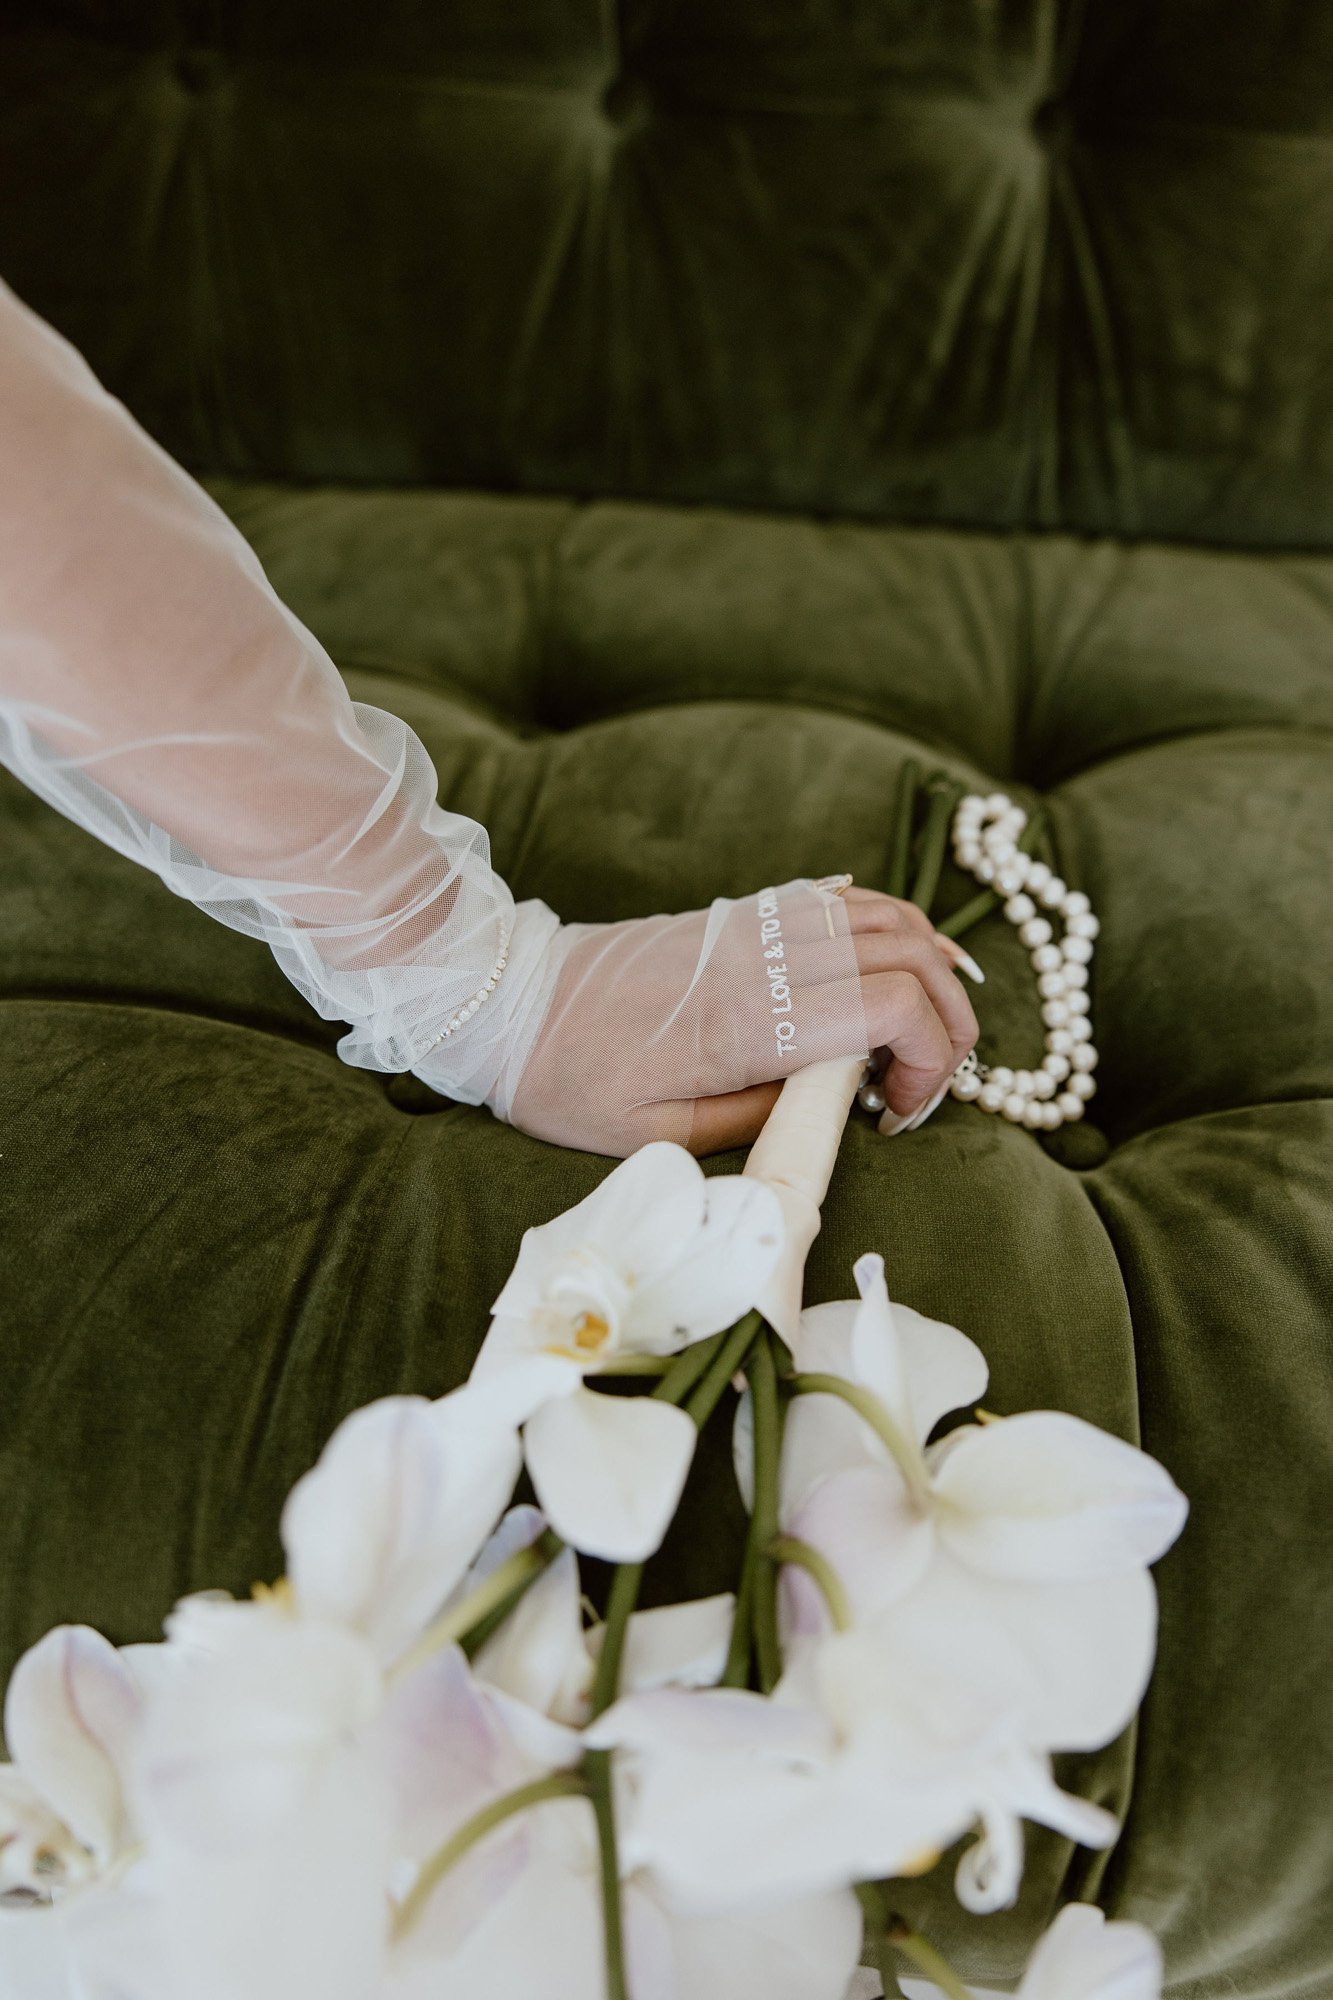 the brides white bouquet on a green velvet couch.